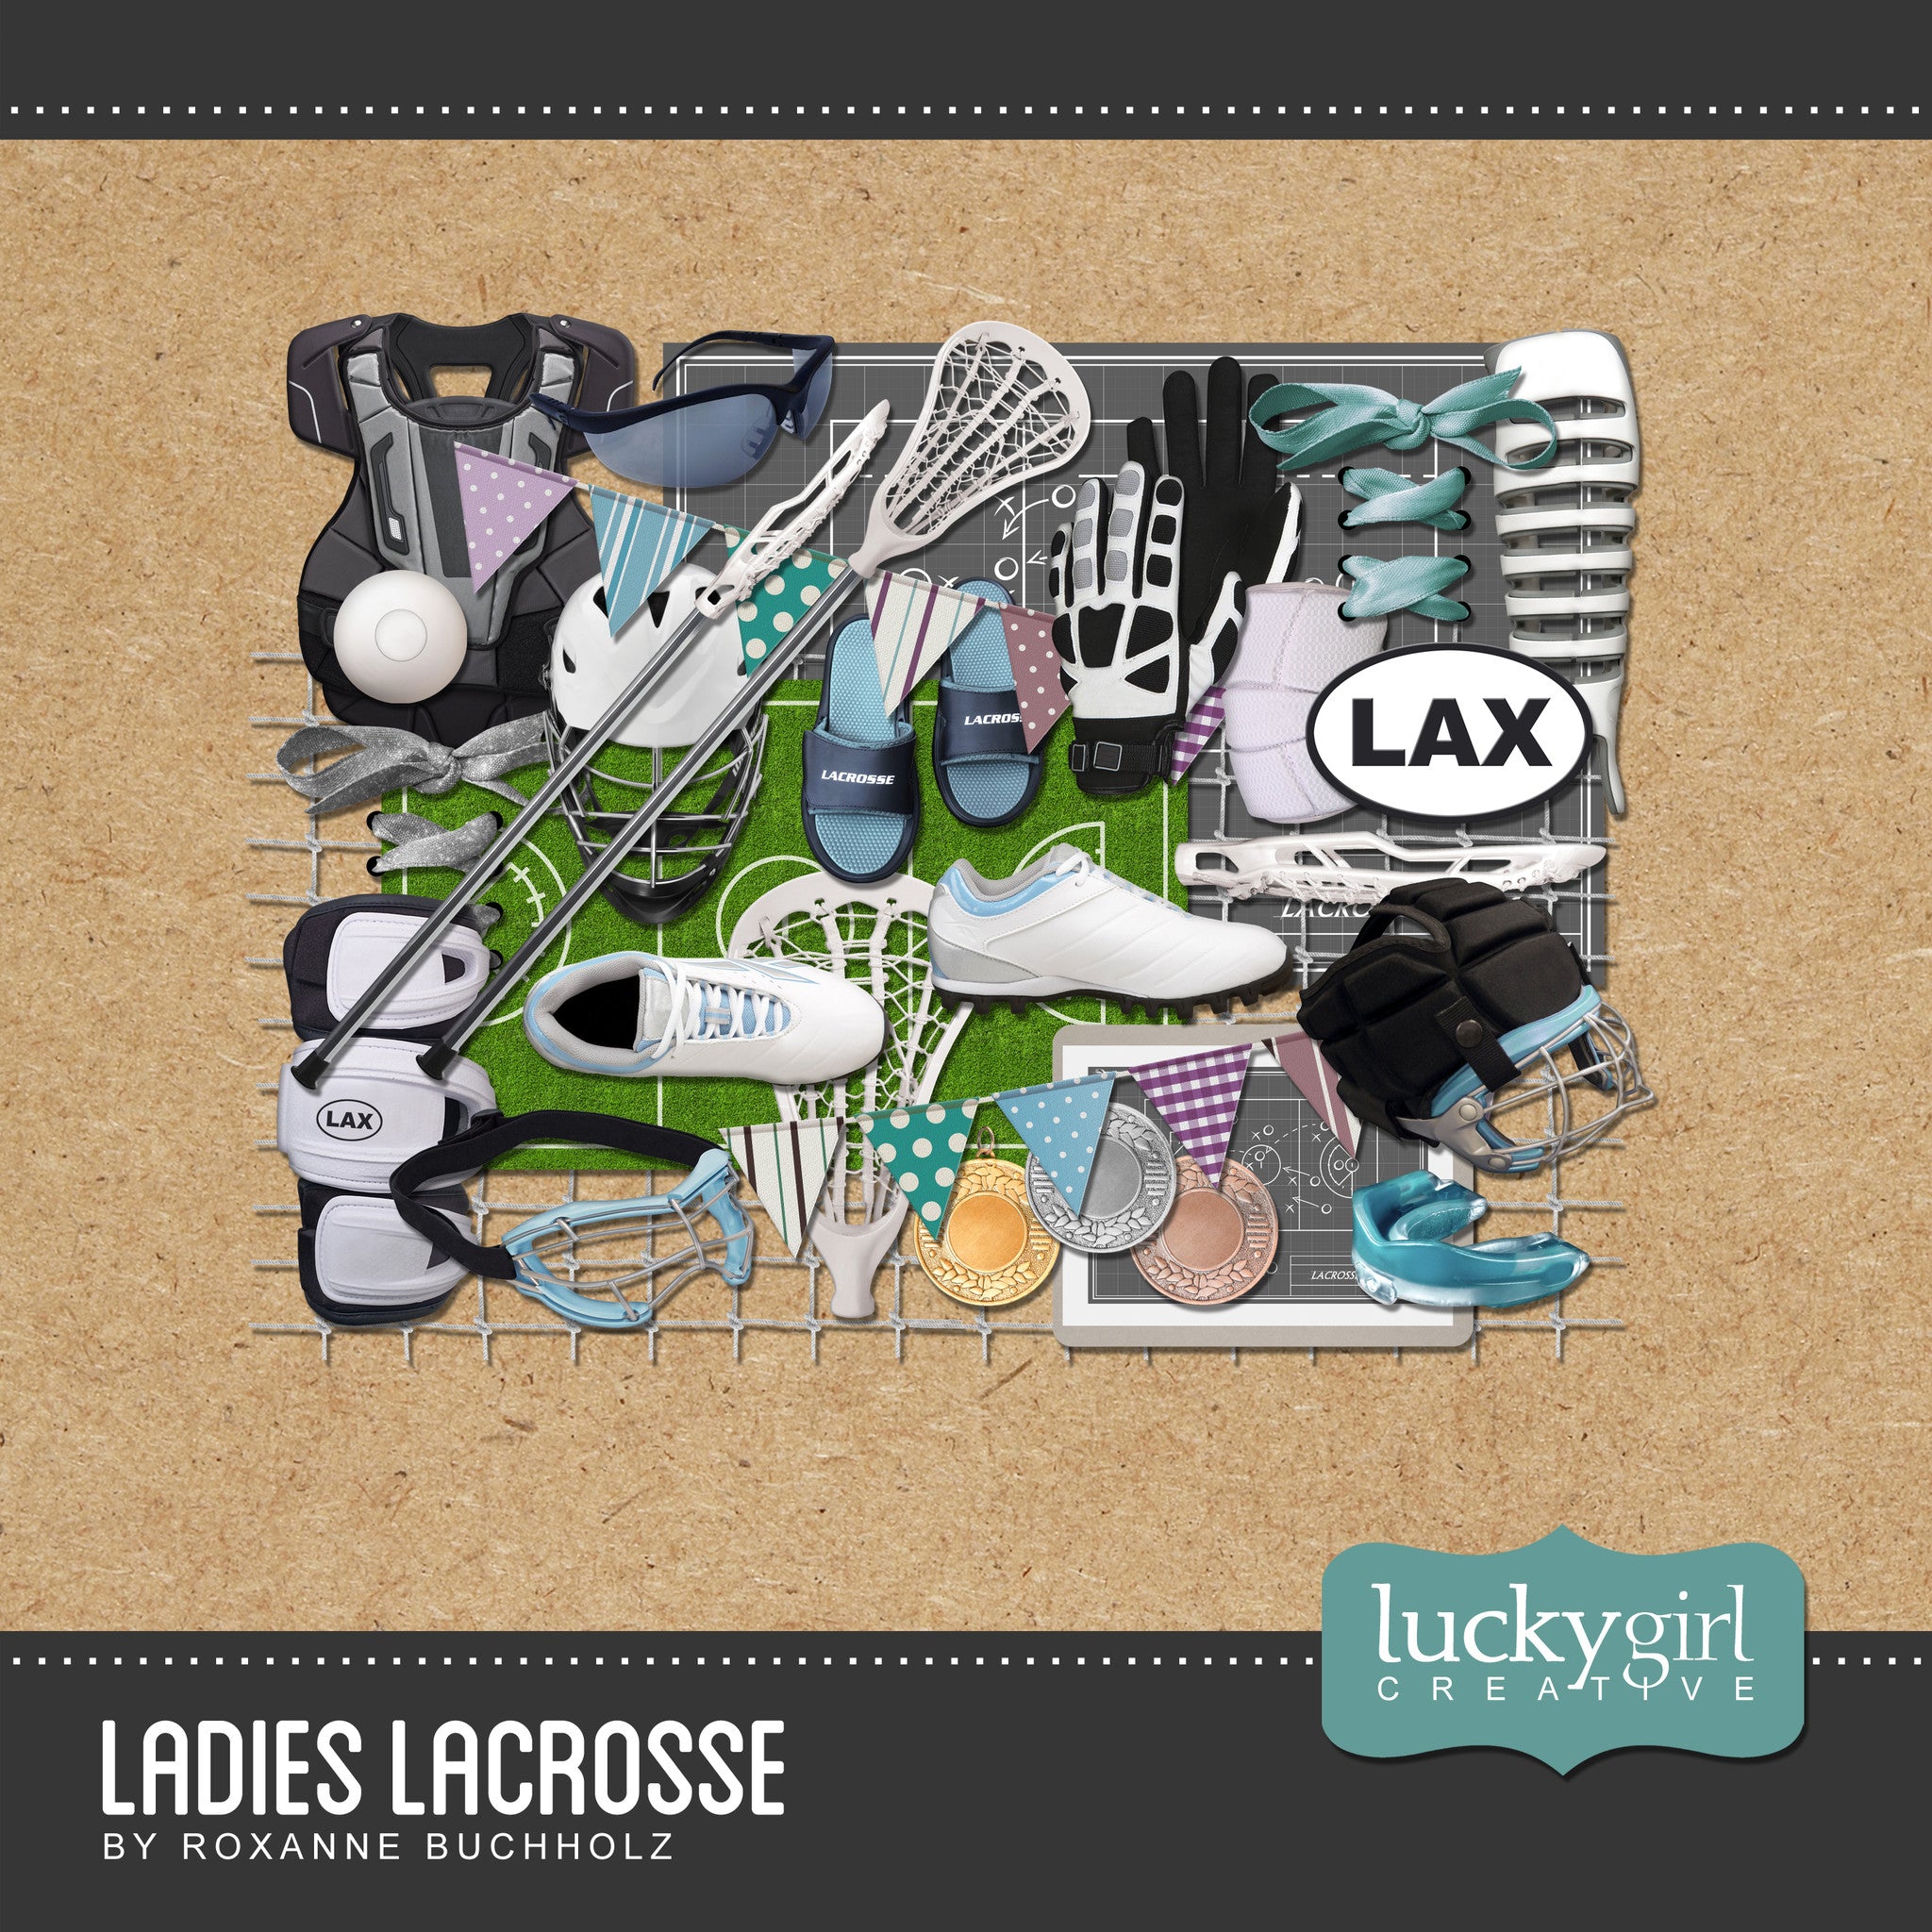 This clean and refreshing Ladies Lacrosse Digital Scrapbook Kit by Lucky Girl Creative covers all aspects of lacrosse in a photo-realist style that would appeal to anyone. Many of the digital art embellishments are neutral and can be used for men’s lacrosse as well. Embellishments include all protective gear, goggles, helmets, gloves, arm pads, knee pads, sticks, ball, tennis shoes, shoe laces, mouth guard, medals, LAX stickers, LAX stamps, field of play, clip board, strategy plays, netting, and more!